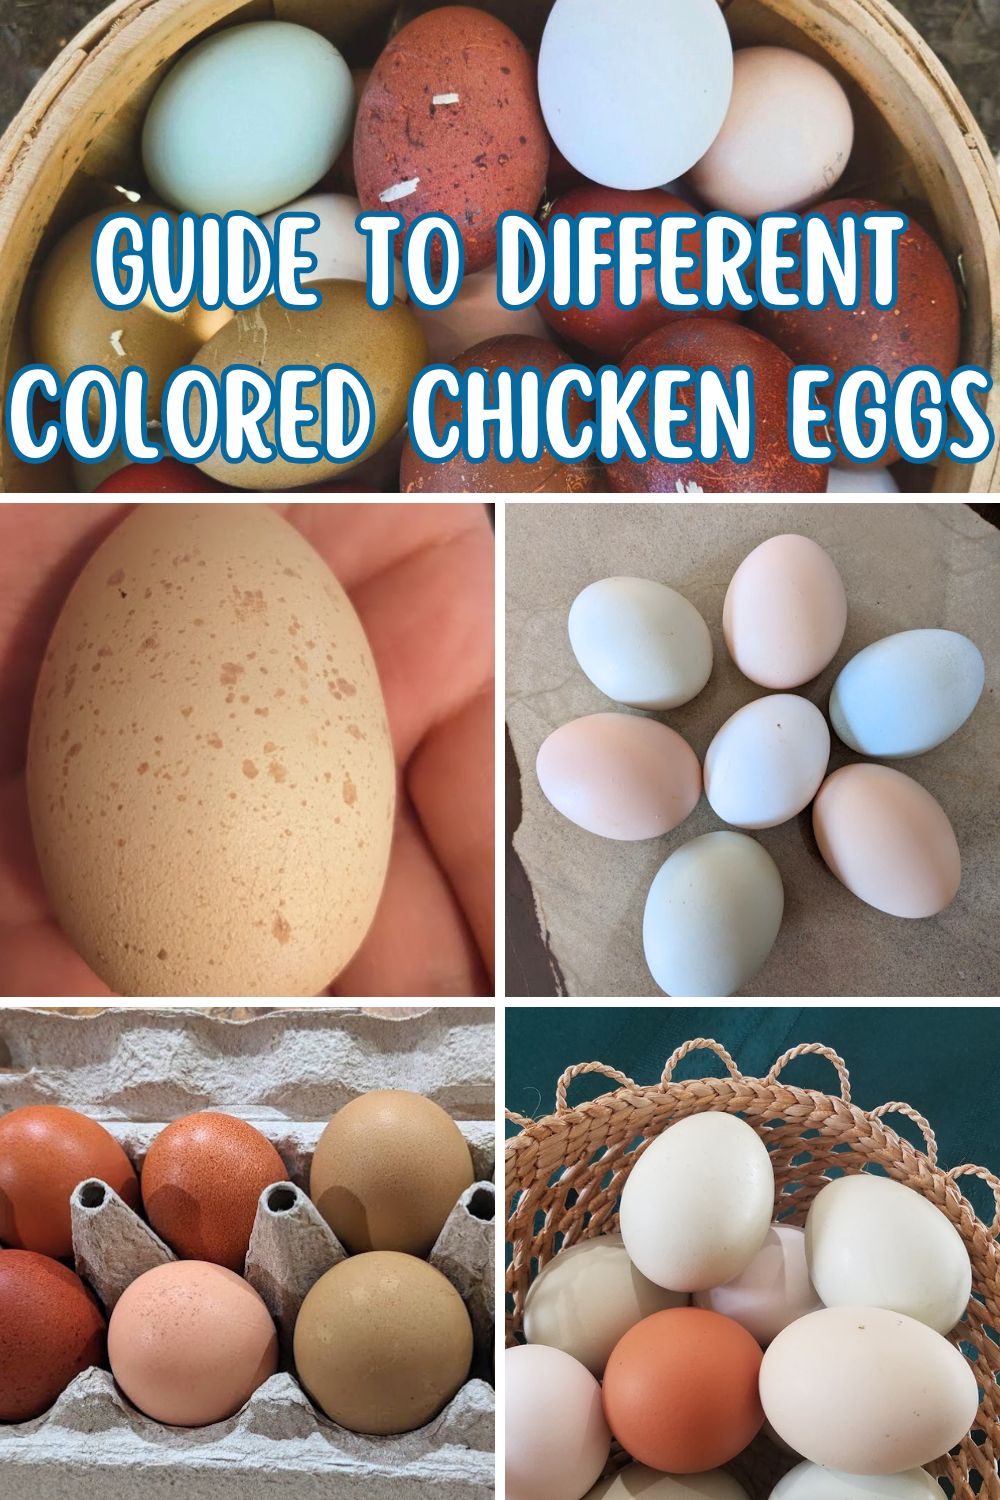 Guide to Different Colored Chicken Eggs.